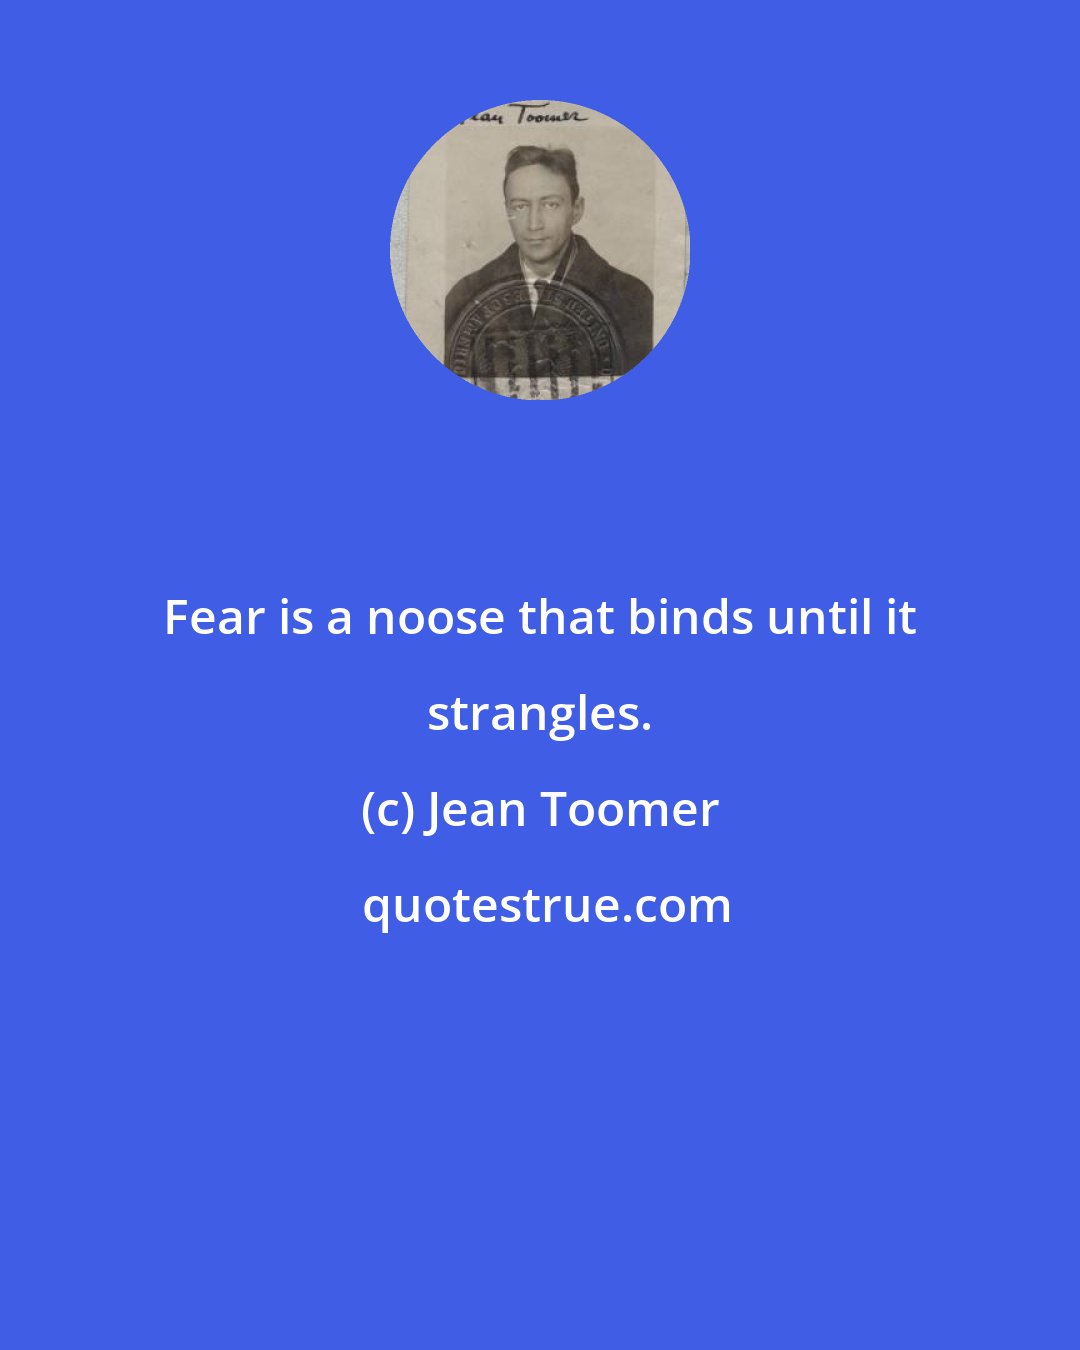 Jean Toomer: Fear is a noose that binds until it strangles.